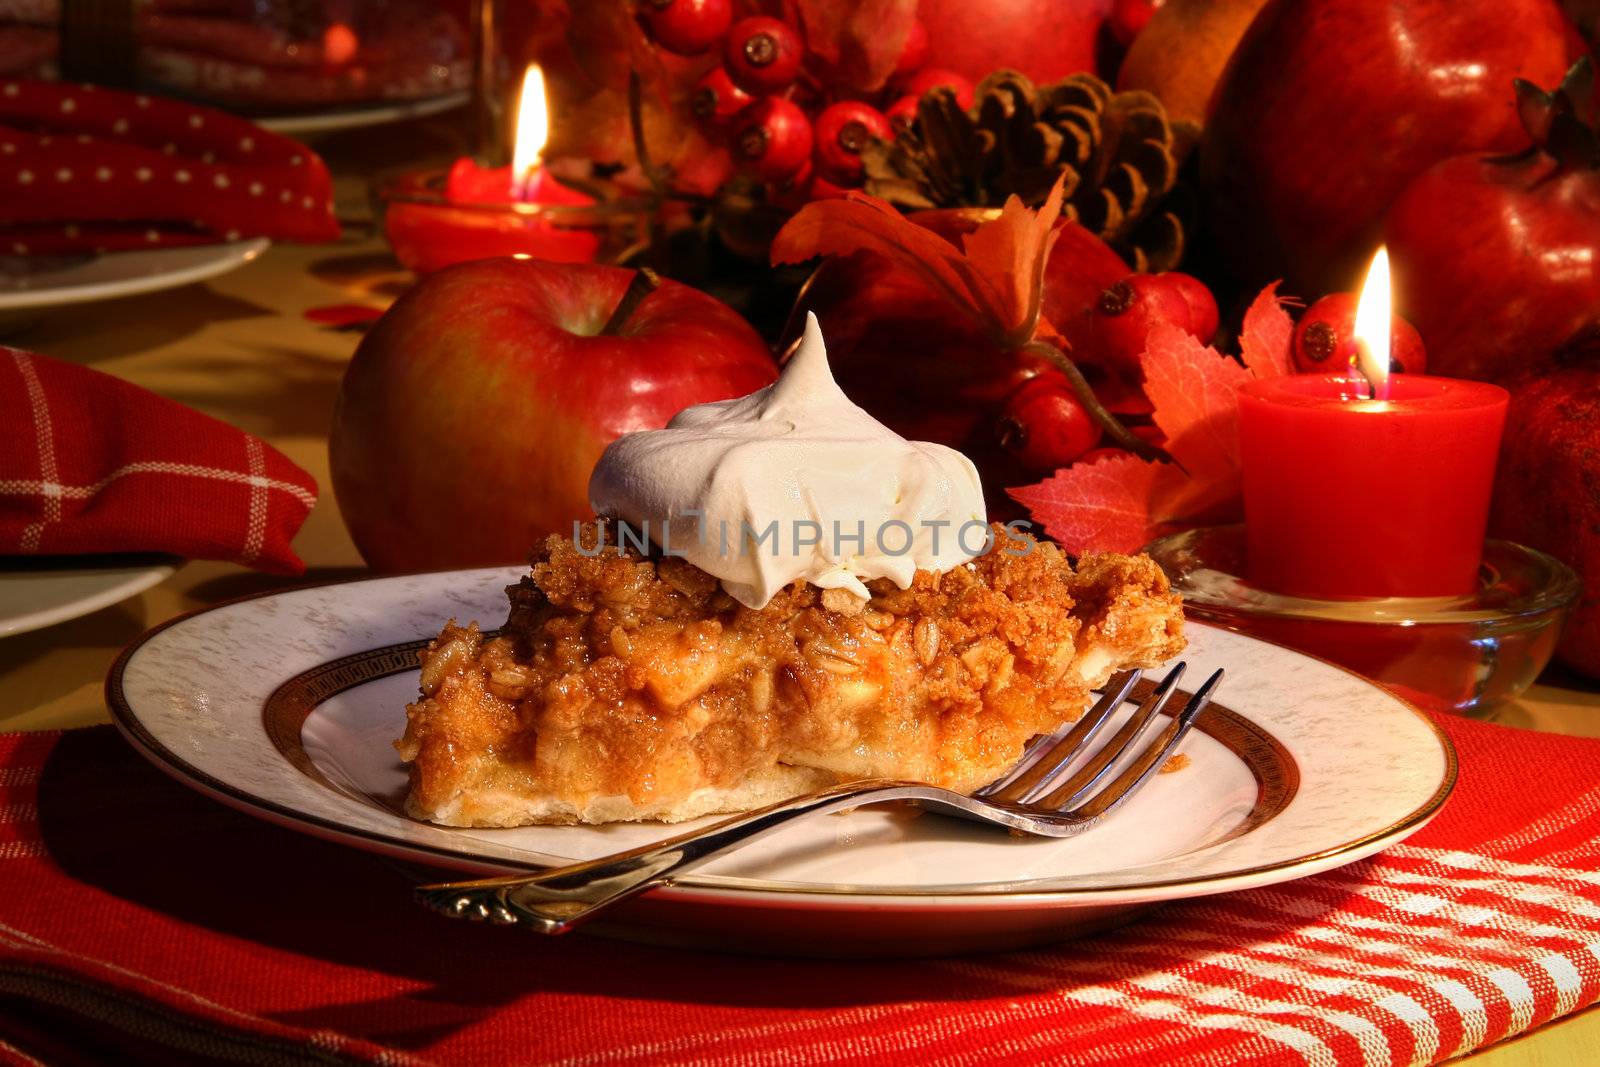 Apple crumble pie for the holidays by Sandralise